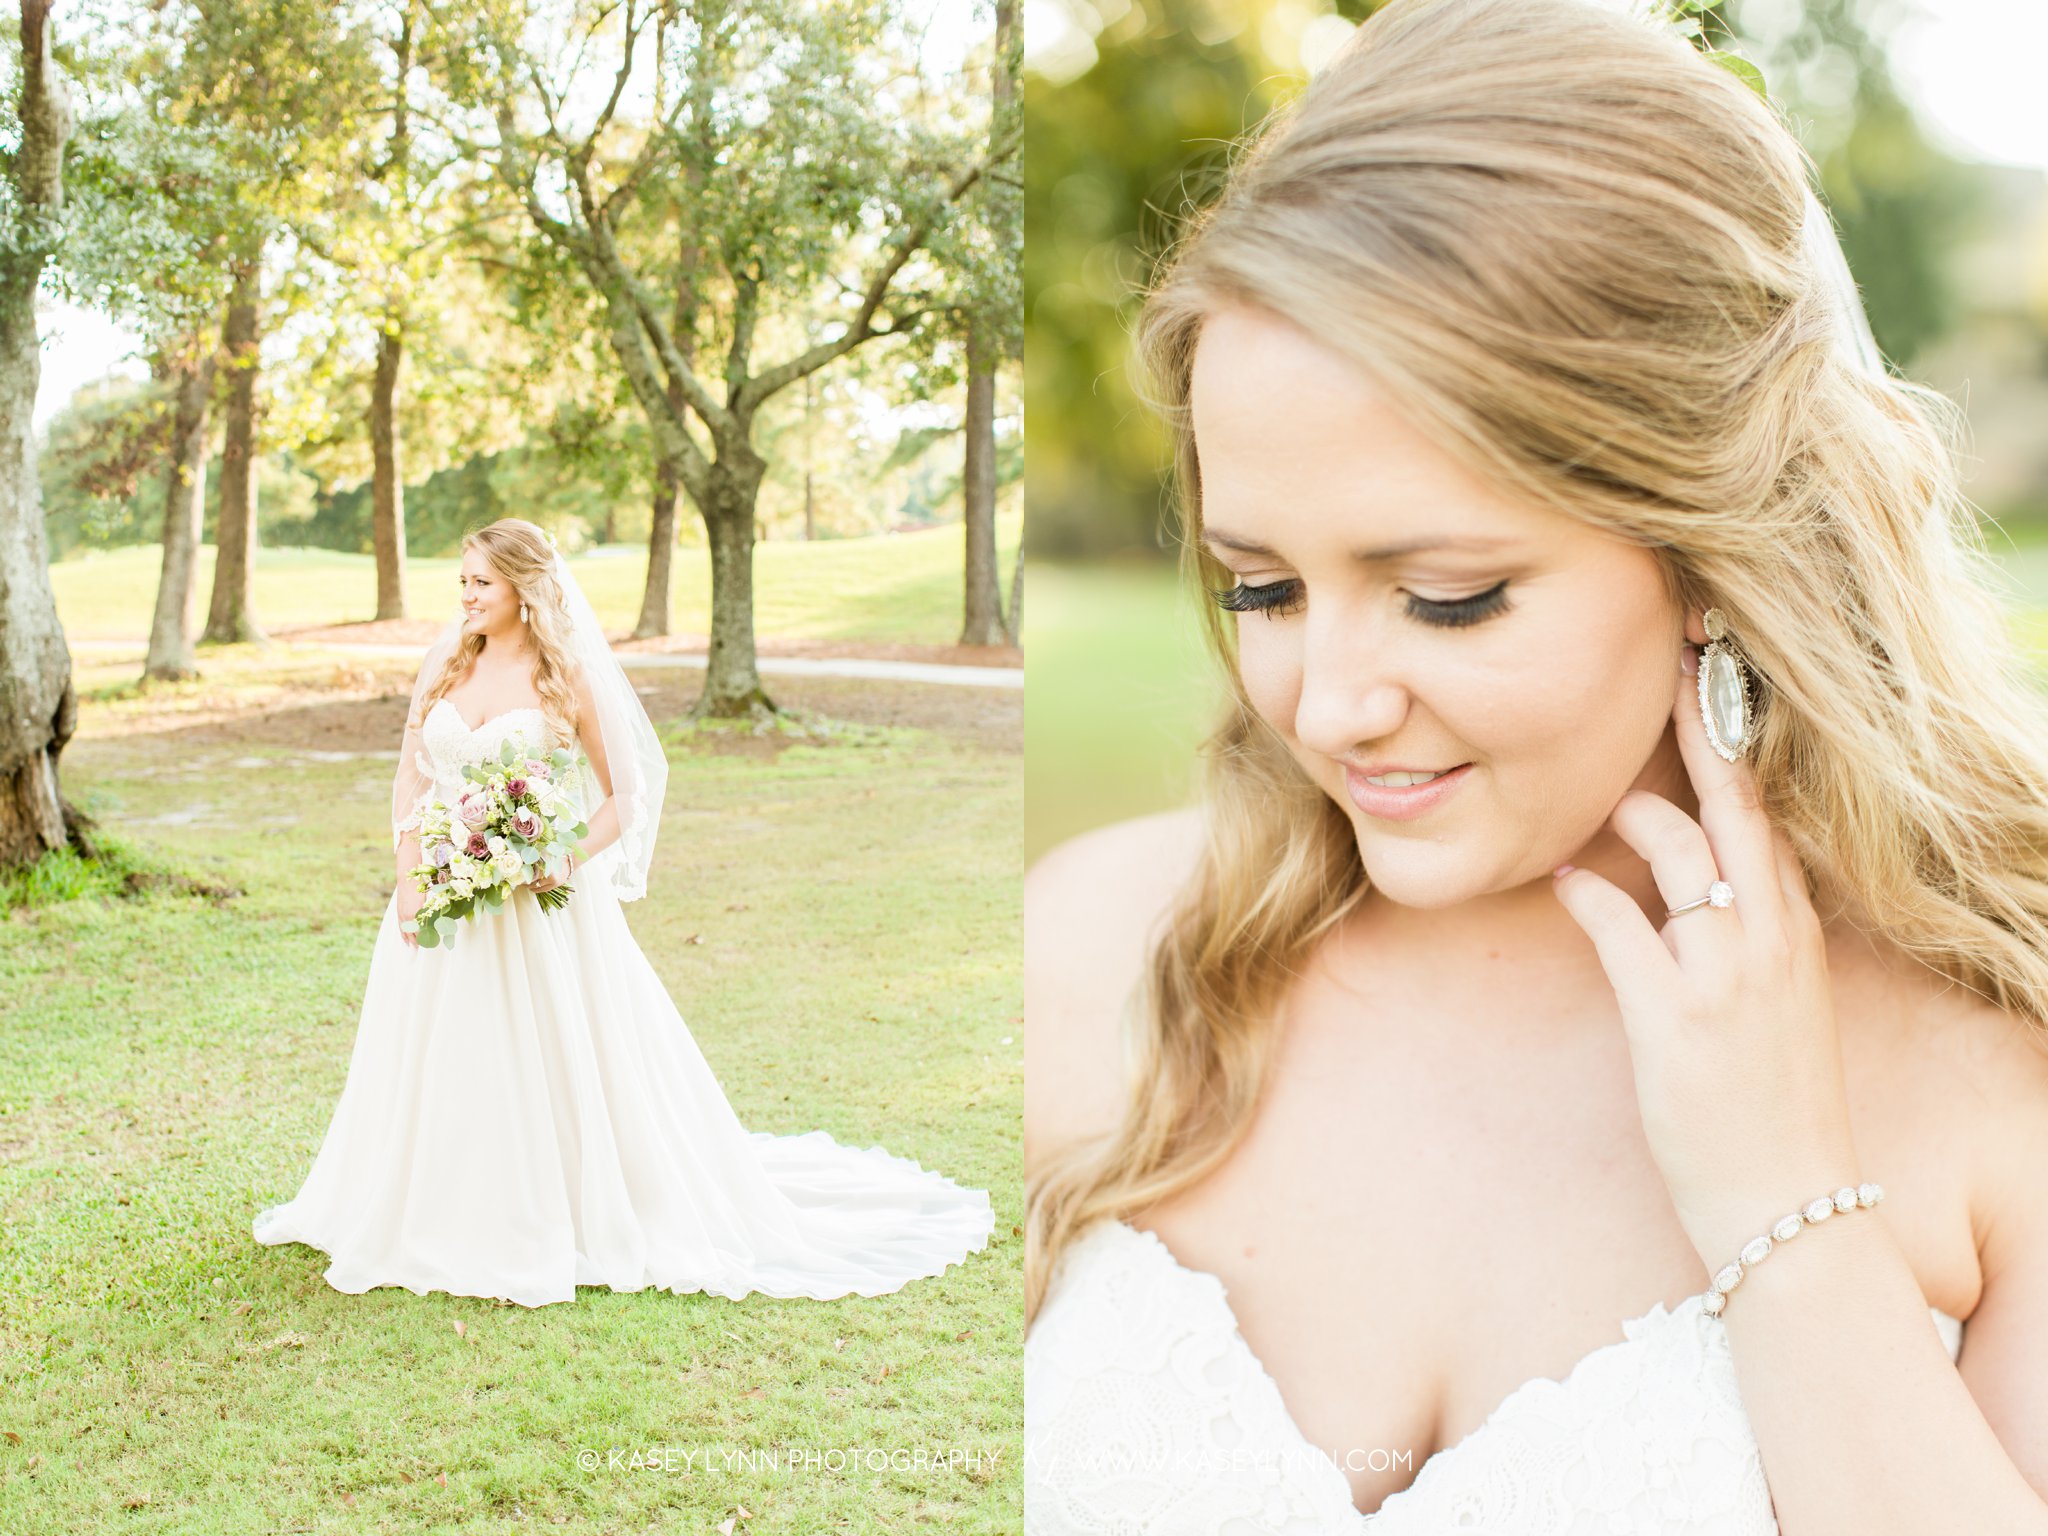 The Woodlands Country Club Bridals / Kasey Lynn Photography